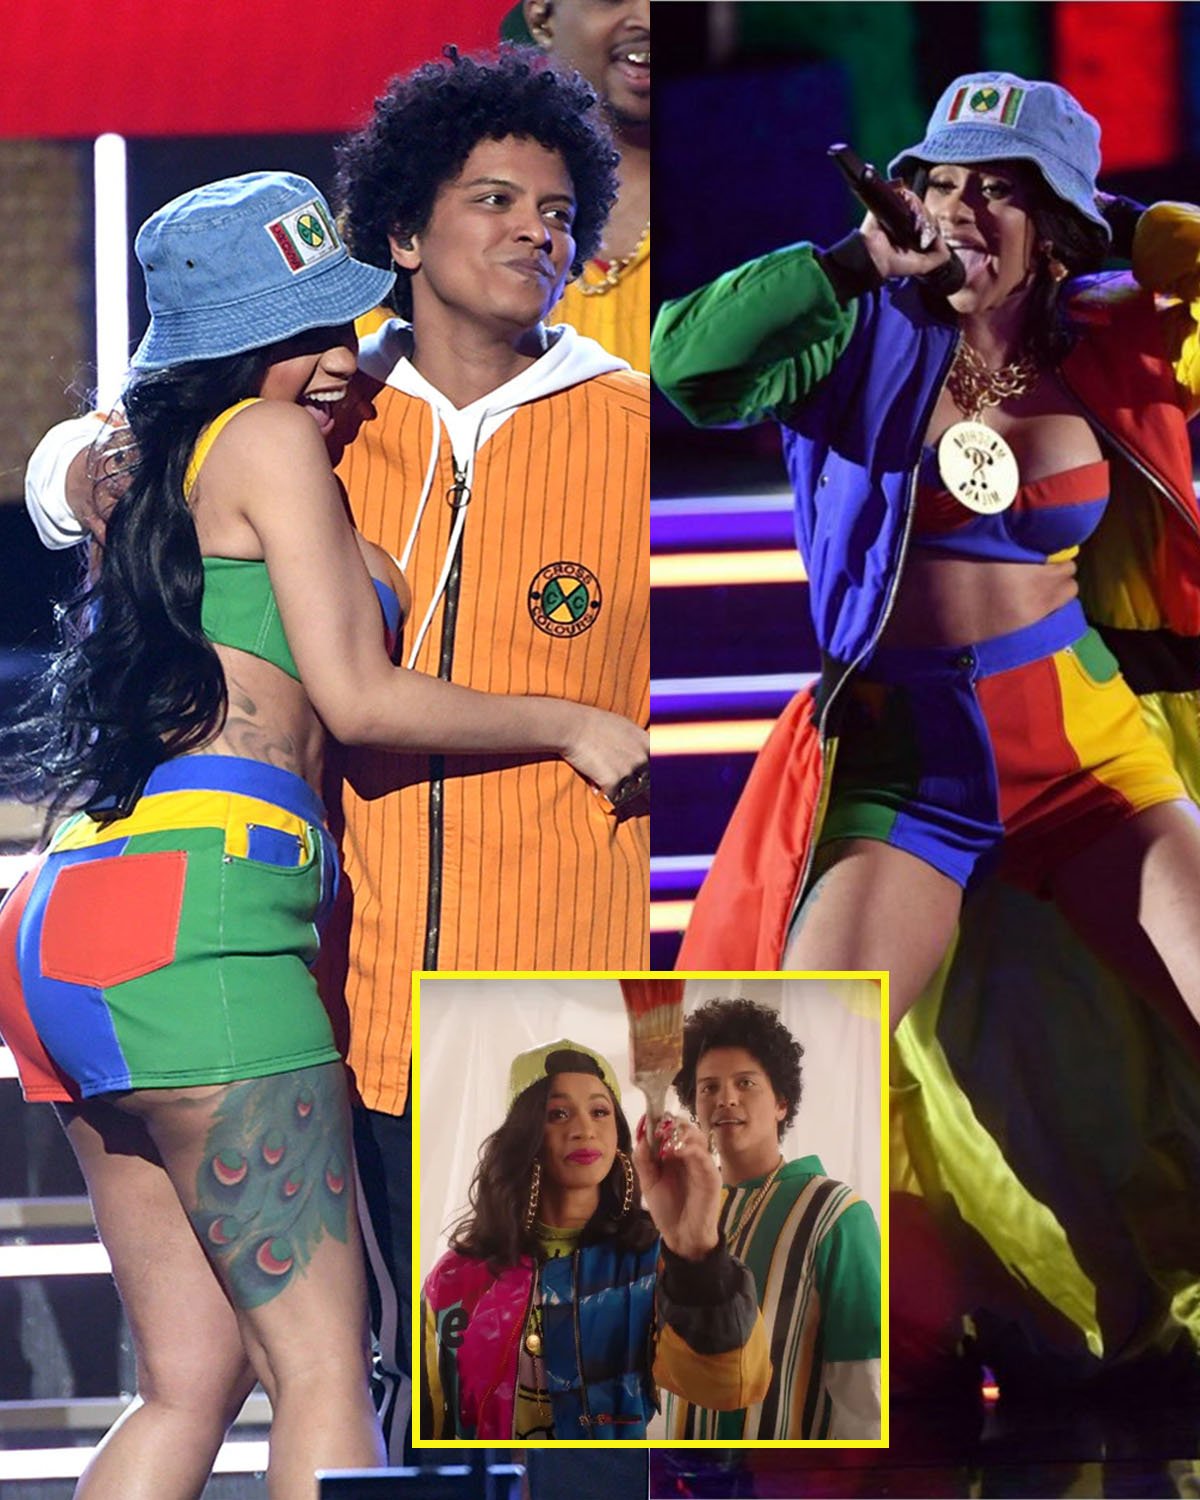 Bruno Mars’ humorous revelation about Cardi B’s body scent during their performance will make you laugh (video)